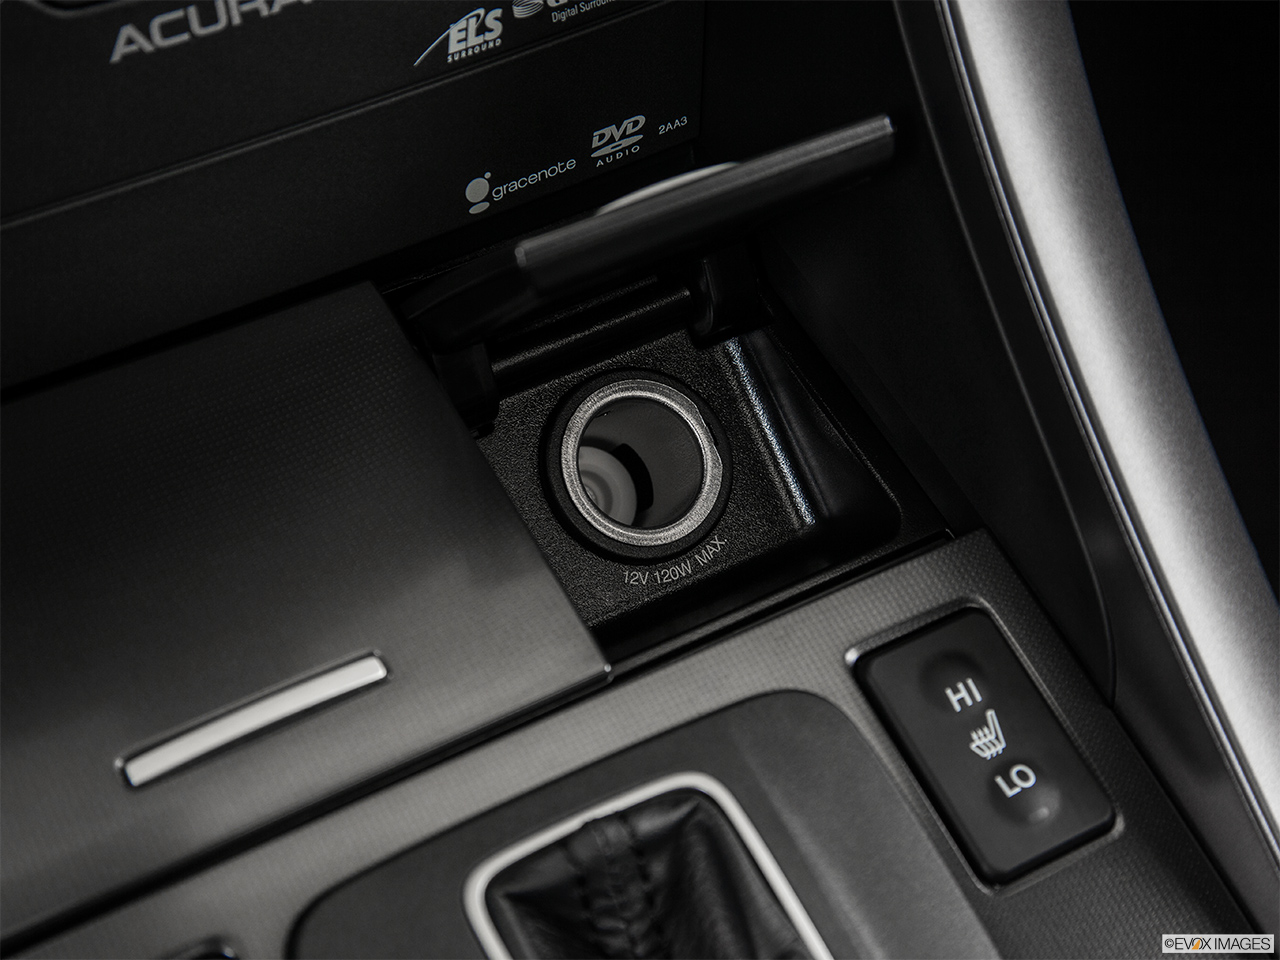 2014 Acura TSX 5-Speed Automatic Main power point. 